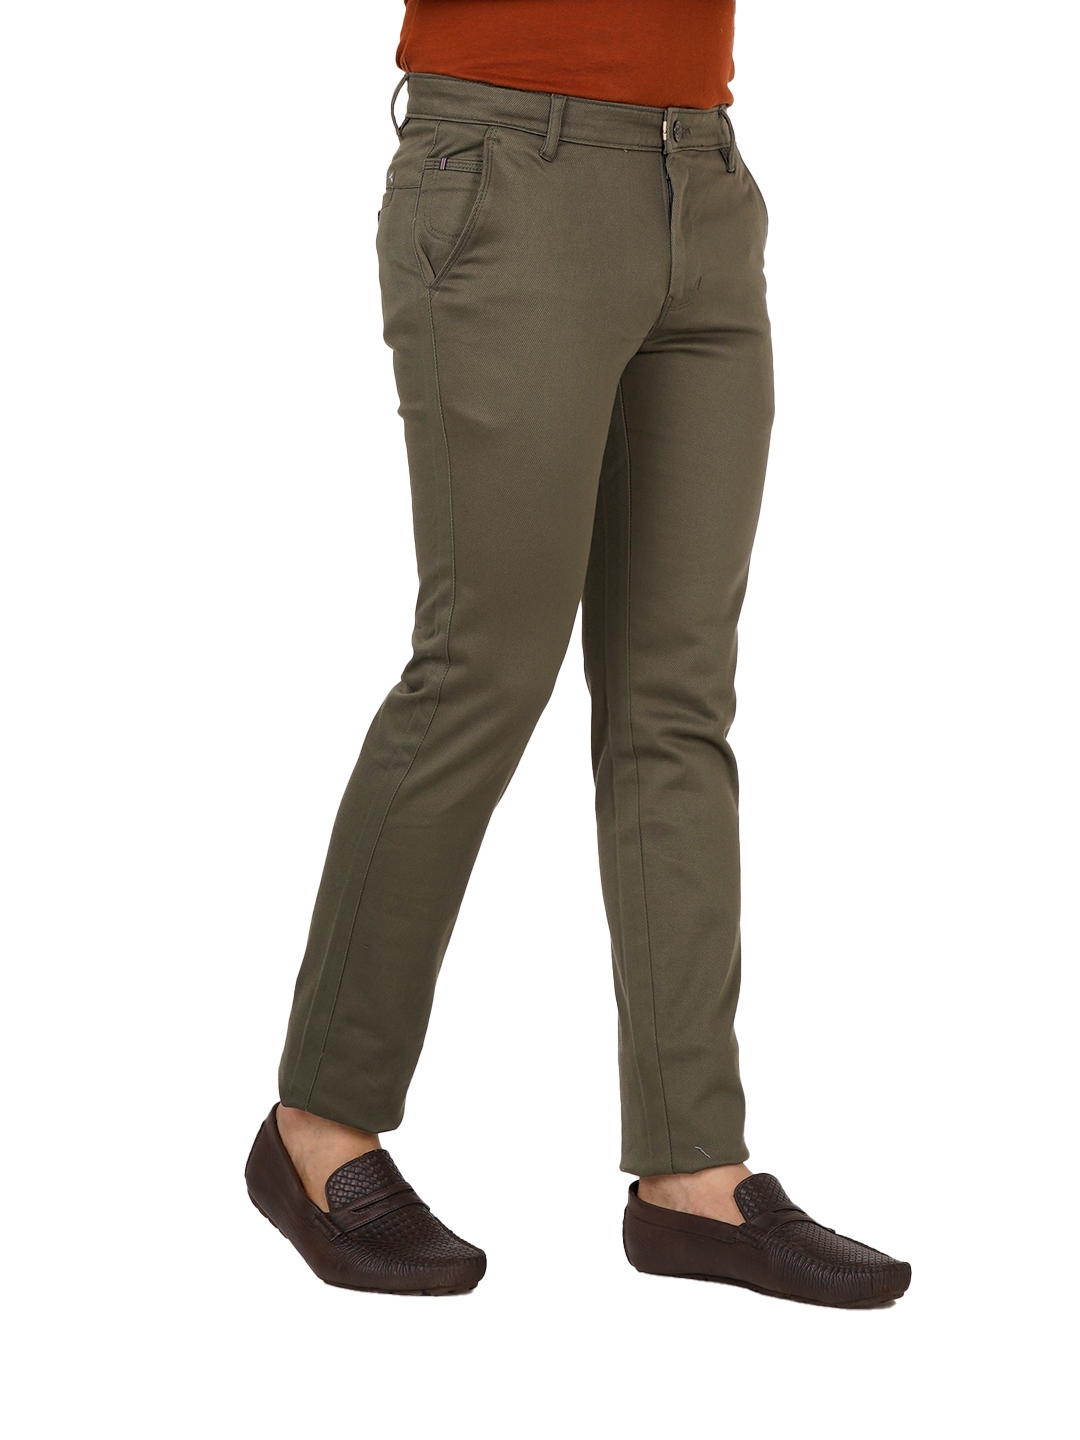 Regular Fit Solid Olive Green Cotton Pants  SKYTICK